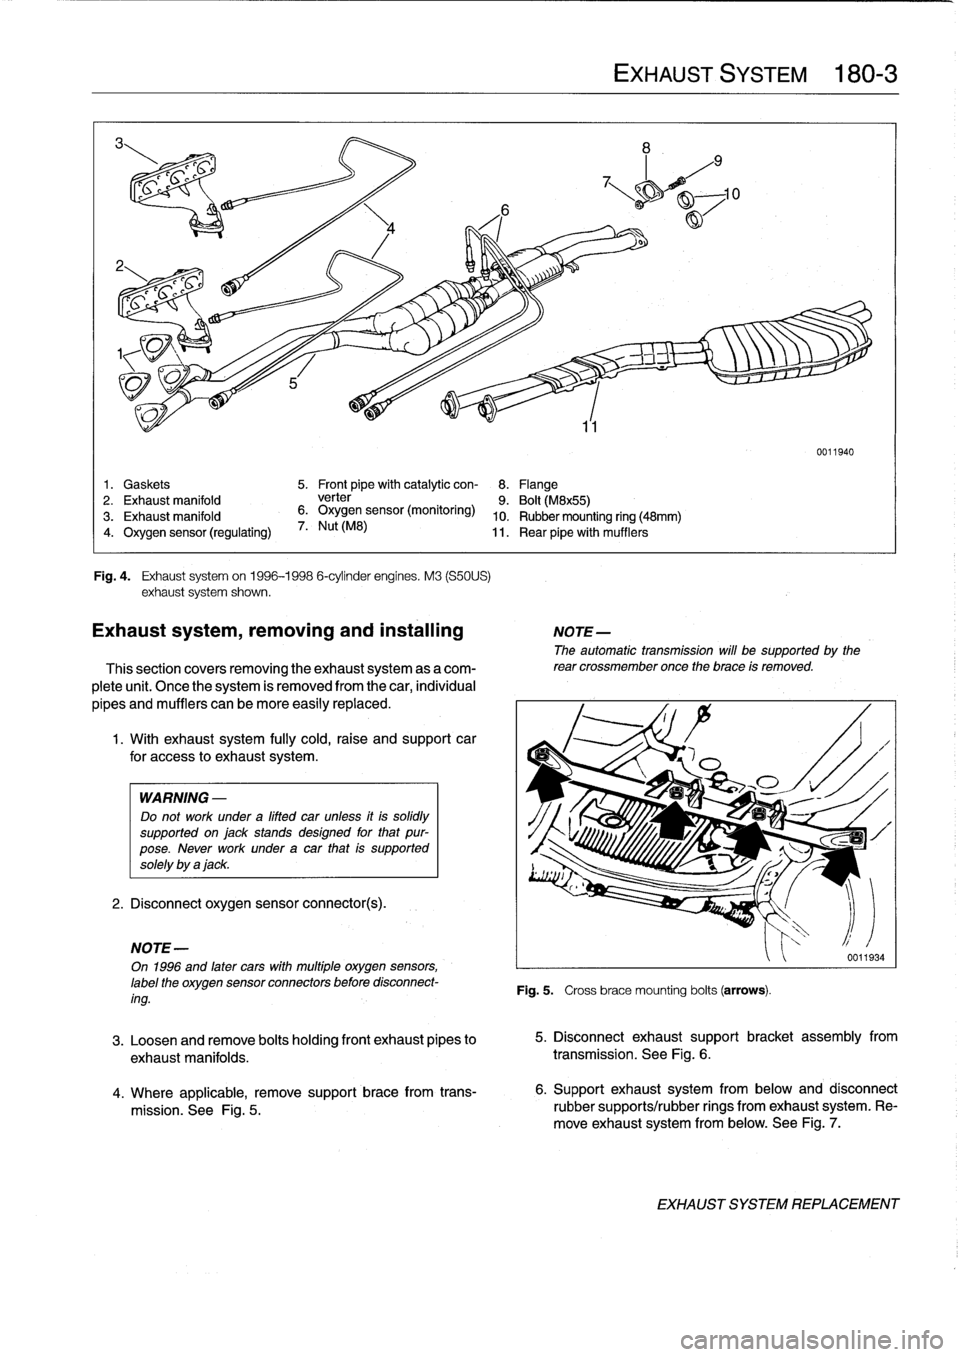 BMW 325i 1993 E36 Owners Guide 
1
.

	

Gaskets

	

5
.

	

Front
pipe
with
catalytic
con-

	

8
.

	

Flange
2
.

	

Exhaust
manifold

	

verter

	

9
.

	

Bolt
(M8x55)

3
.
Exhaust
manifold

	

6
.
Oxygen
sensor
(monitoring)

	
